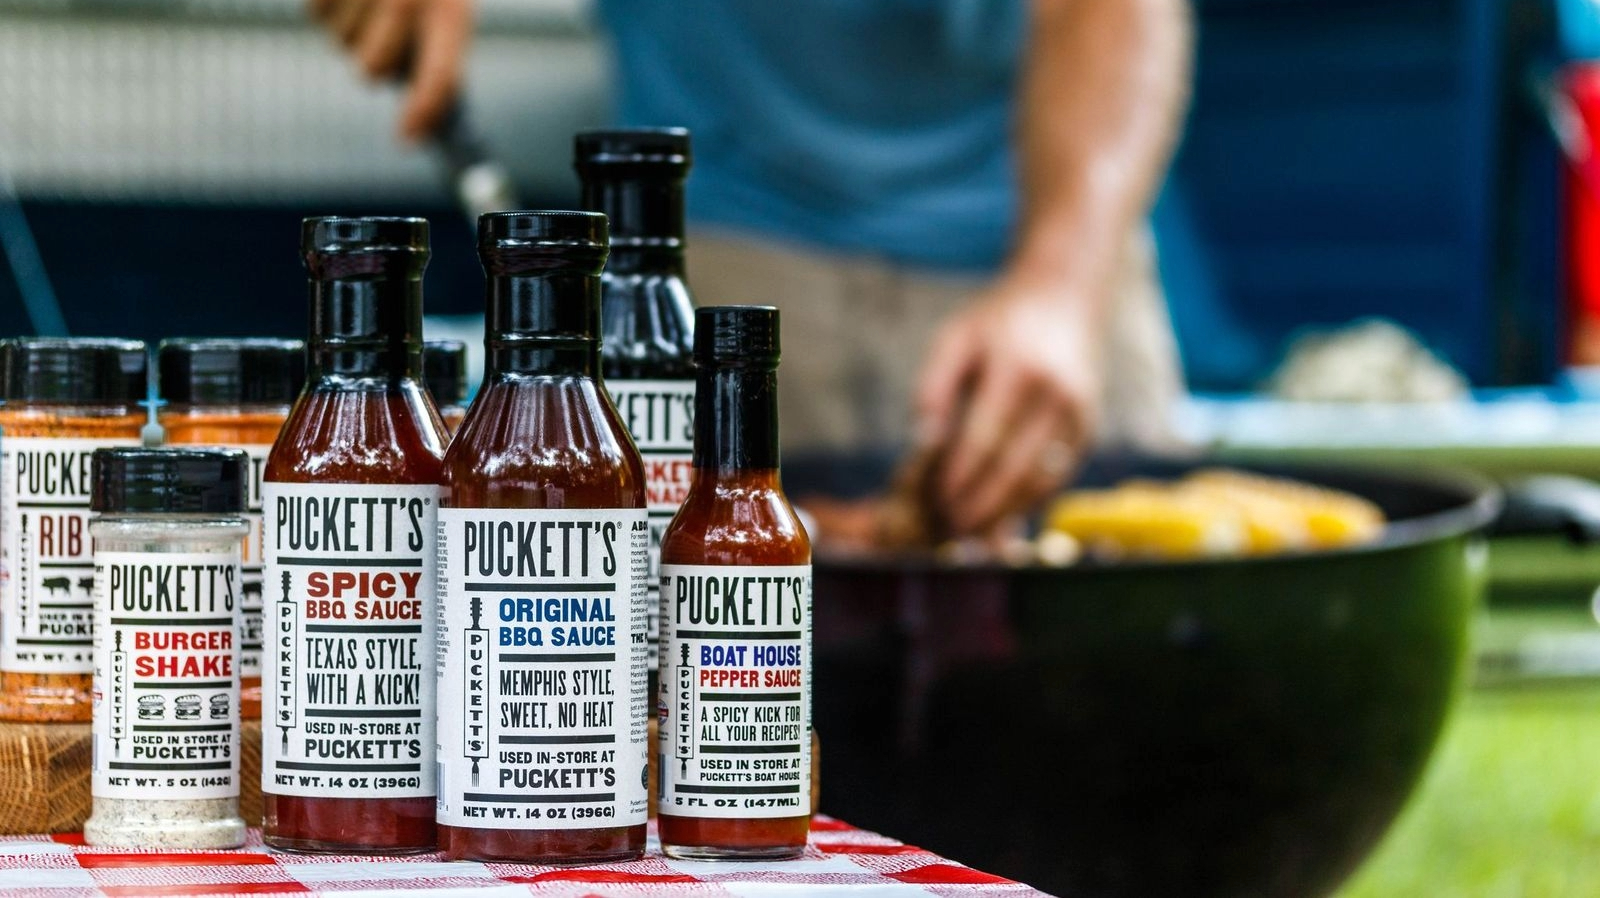 Pucketts Fire up the grill sale